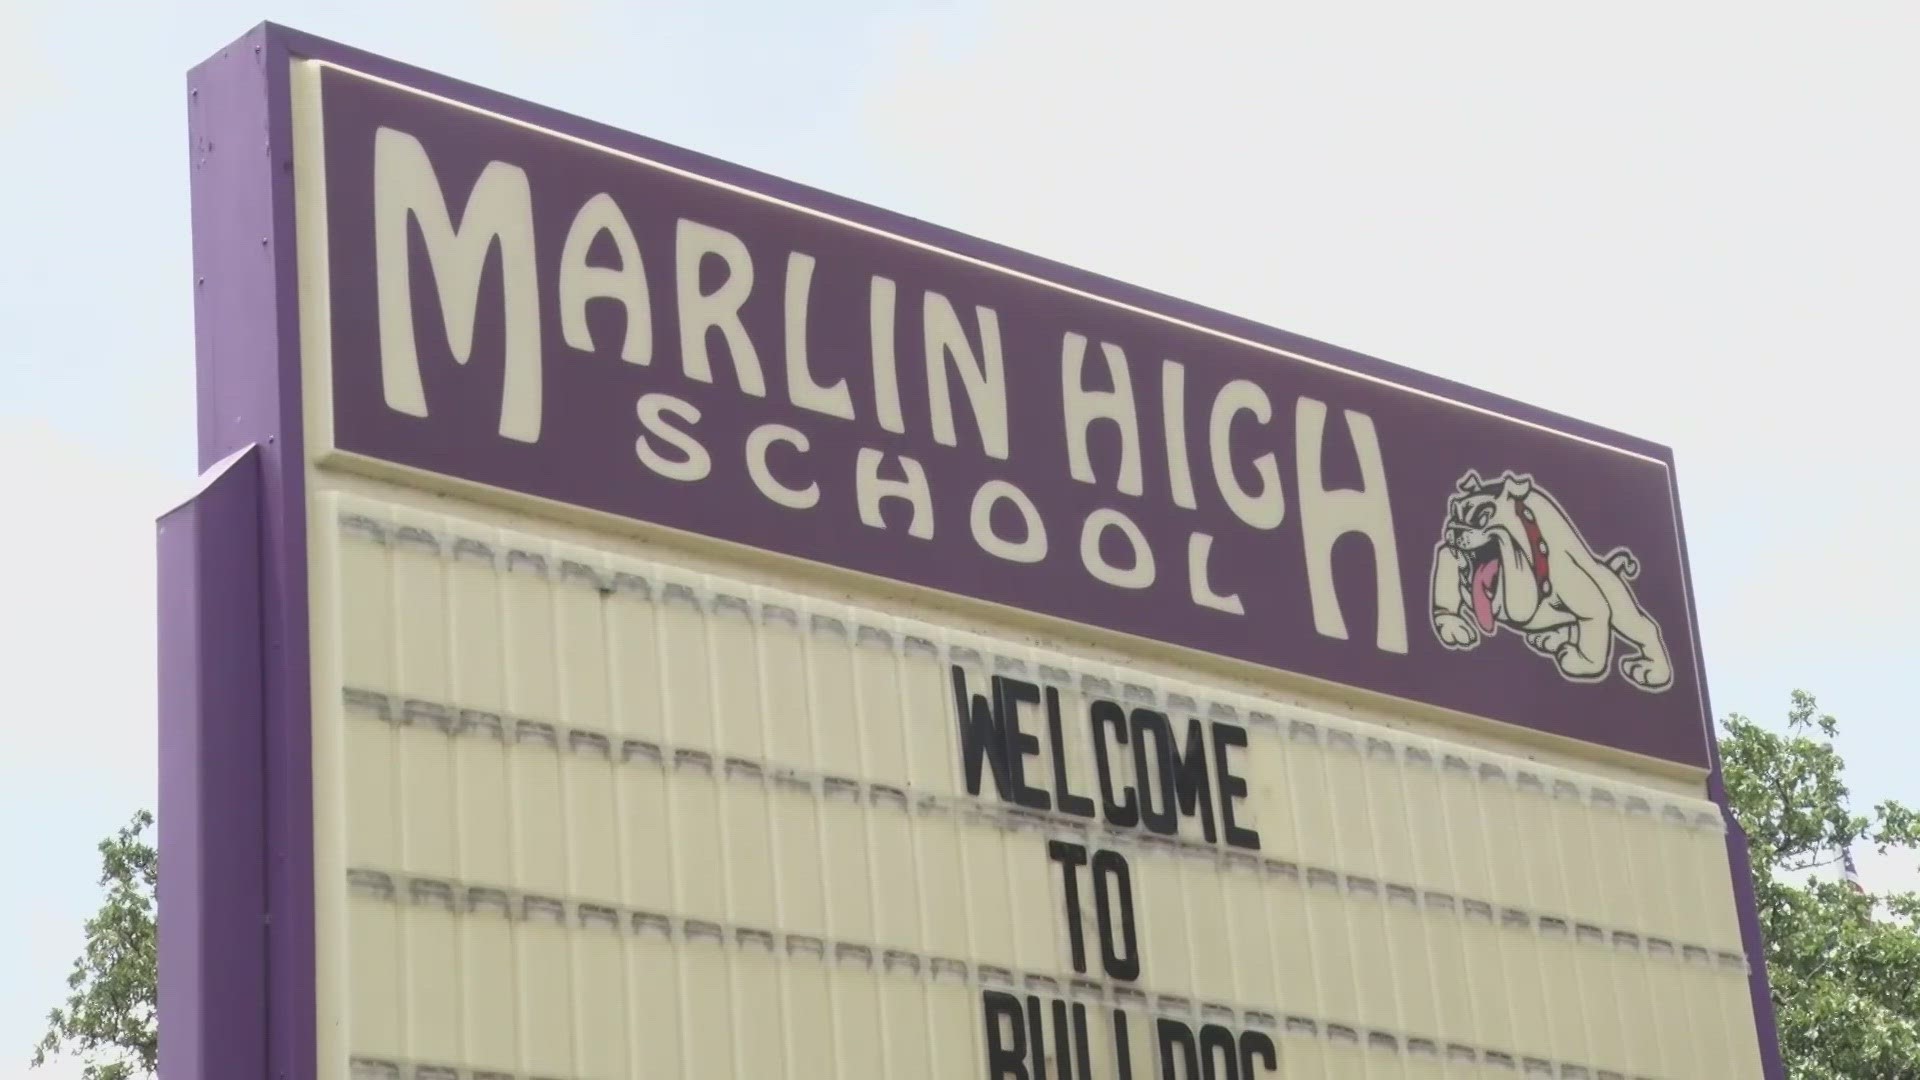 Marlin ISD announced that it will be postponing high school graduation until June in order to give students more time to meet graduation requirements